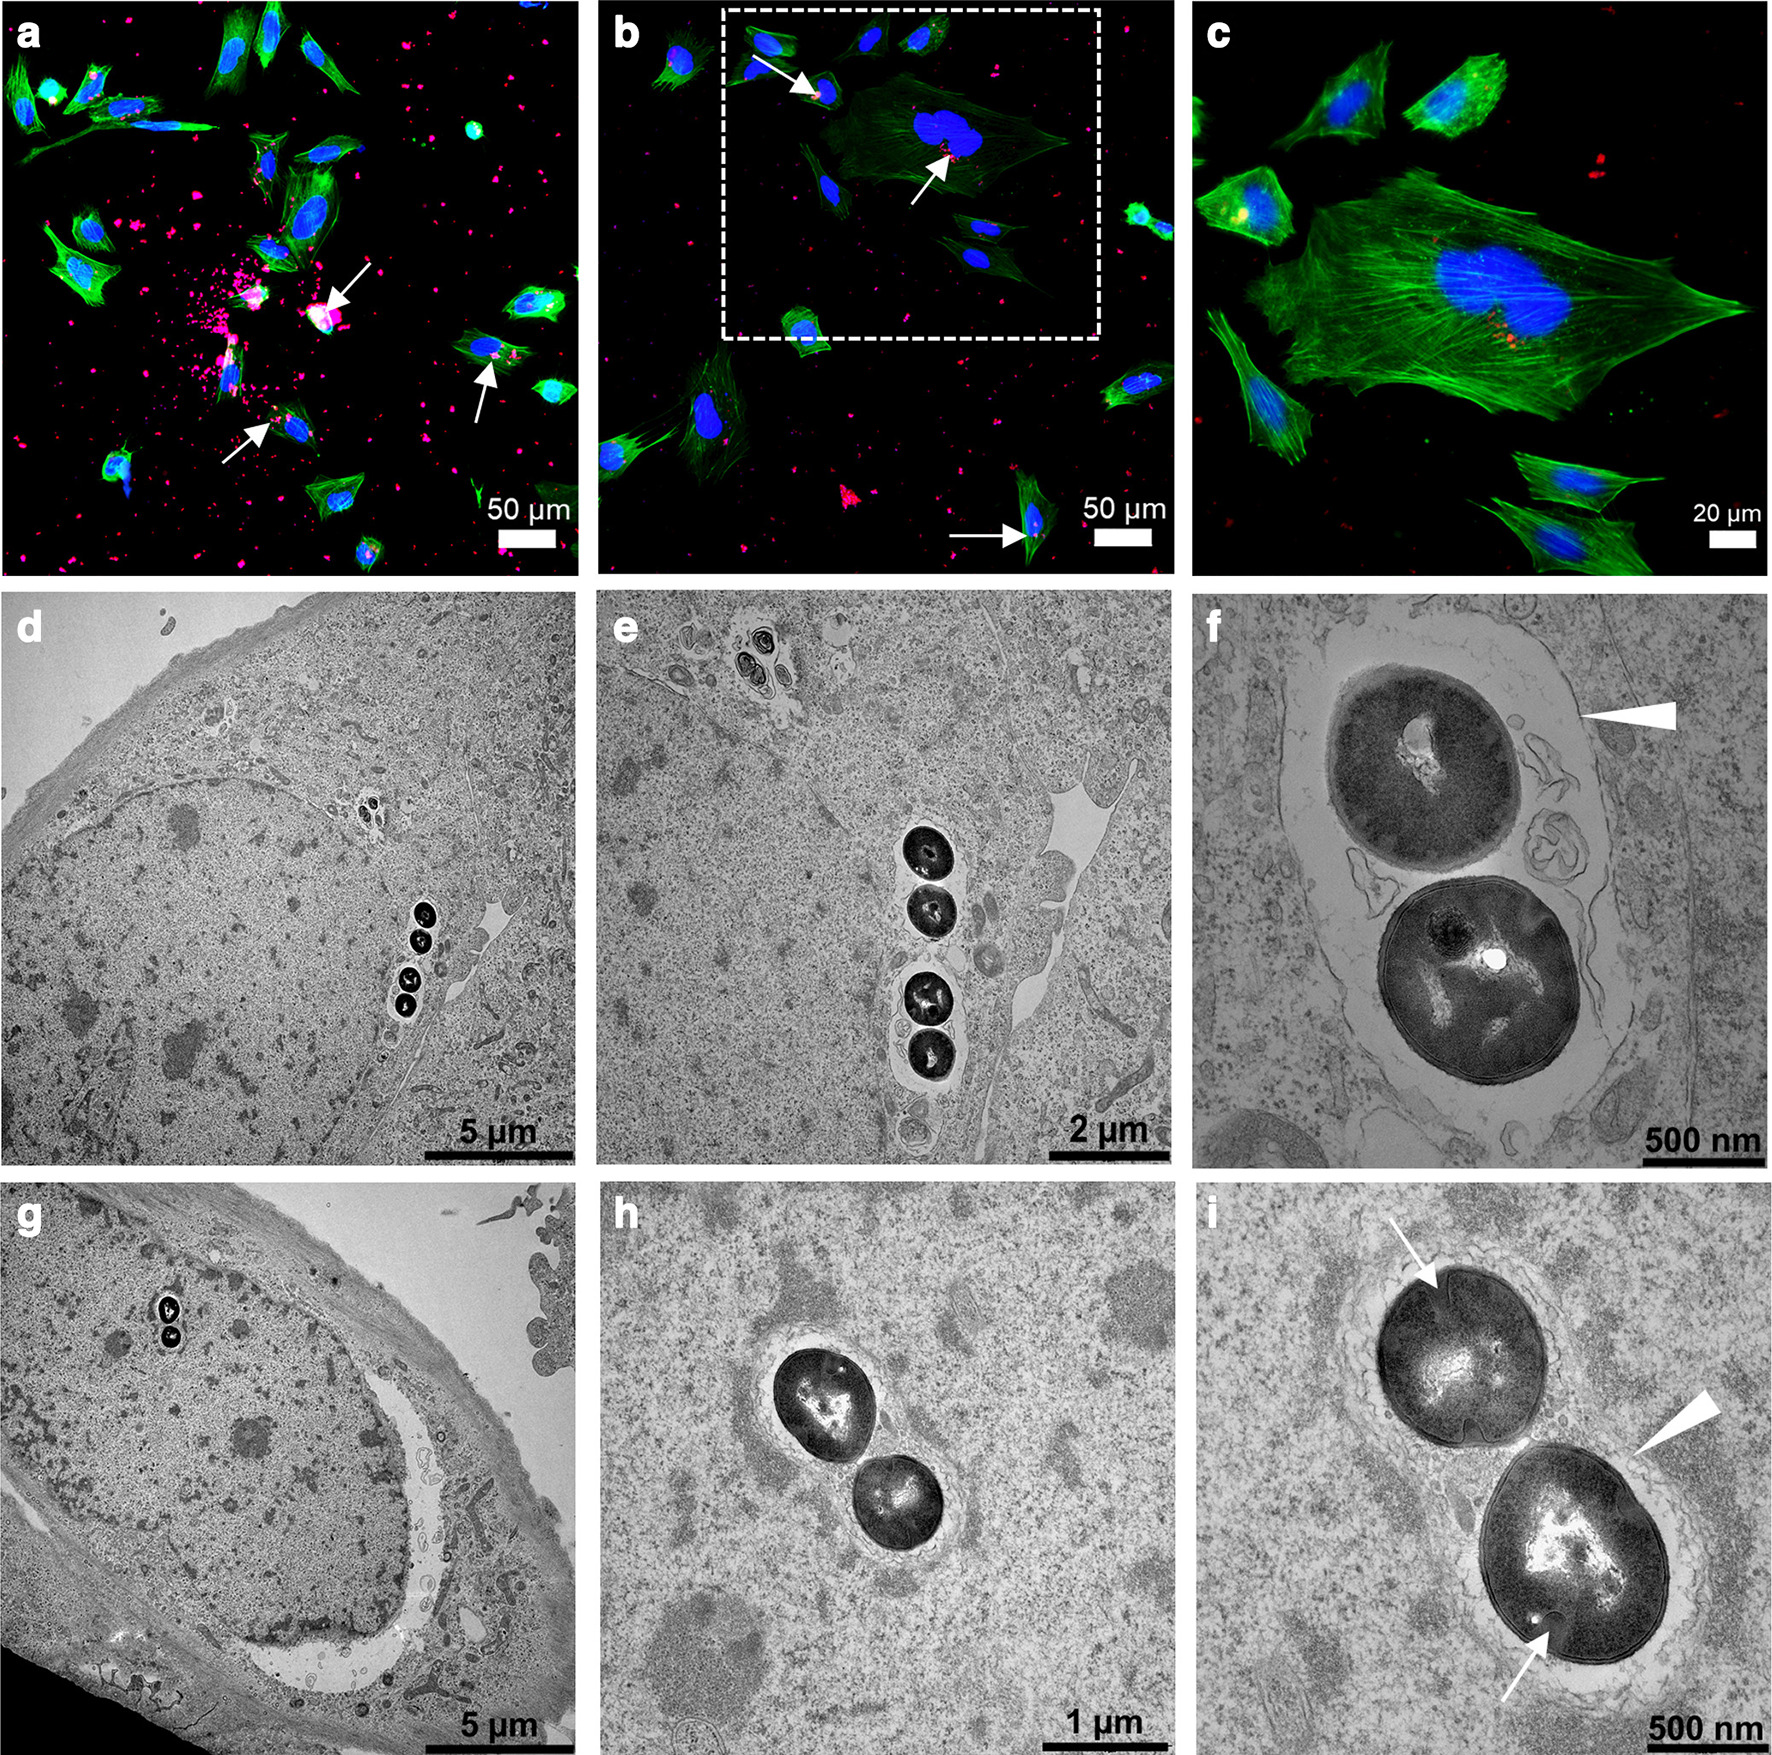 Fig. 1 
            Intracellular invasion of Staphylococcus aureus in osteoblasts. a) to c) Immunofluorescence images showing clusters of S. aureus EDCC 5055 that are localized inside the Saos-2 cells at three hours post-infection. The S. aureus (white arrows), nuclei, and actin filament are stained in red, blue, and green, respectively. d) to i) Ultrastructural imaging of intracellular S. aureus EDCC 5055 revealed internalized bacteria clusters localized close to the cell nuclei membrane. Most bacteria clusters possess intact cell wall/plasma membrane and are surrounded by phagosomal membrane (white arrowheads). Some proliferating bacteria revealed division septa (white arrows).
          